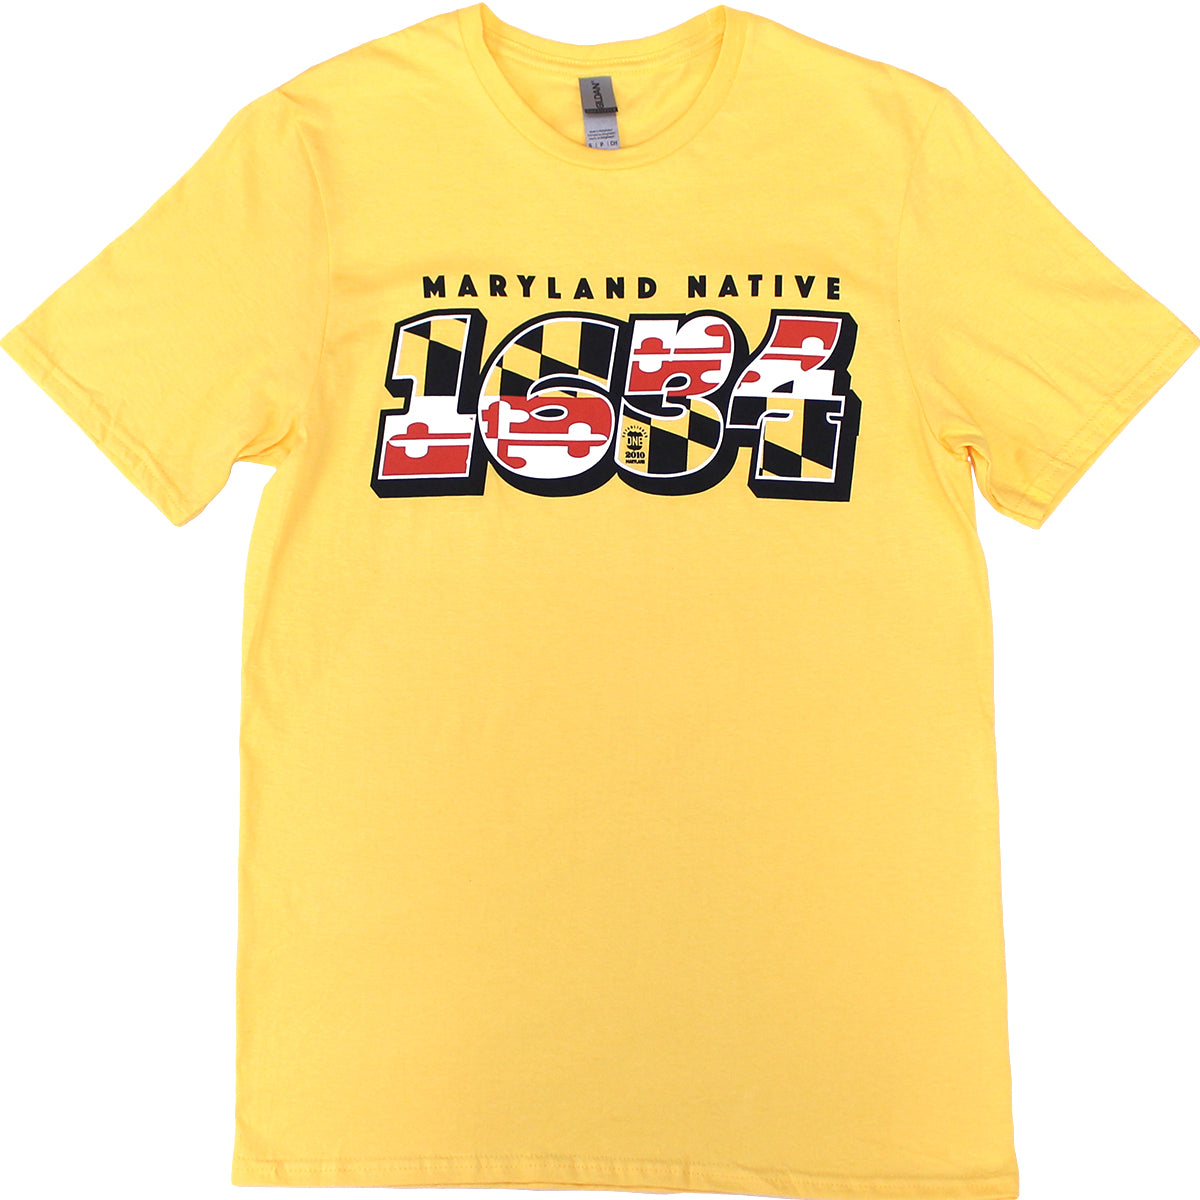 Maryland Native 1634 (Yellow) / Shirt - Route One Apparel